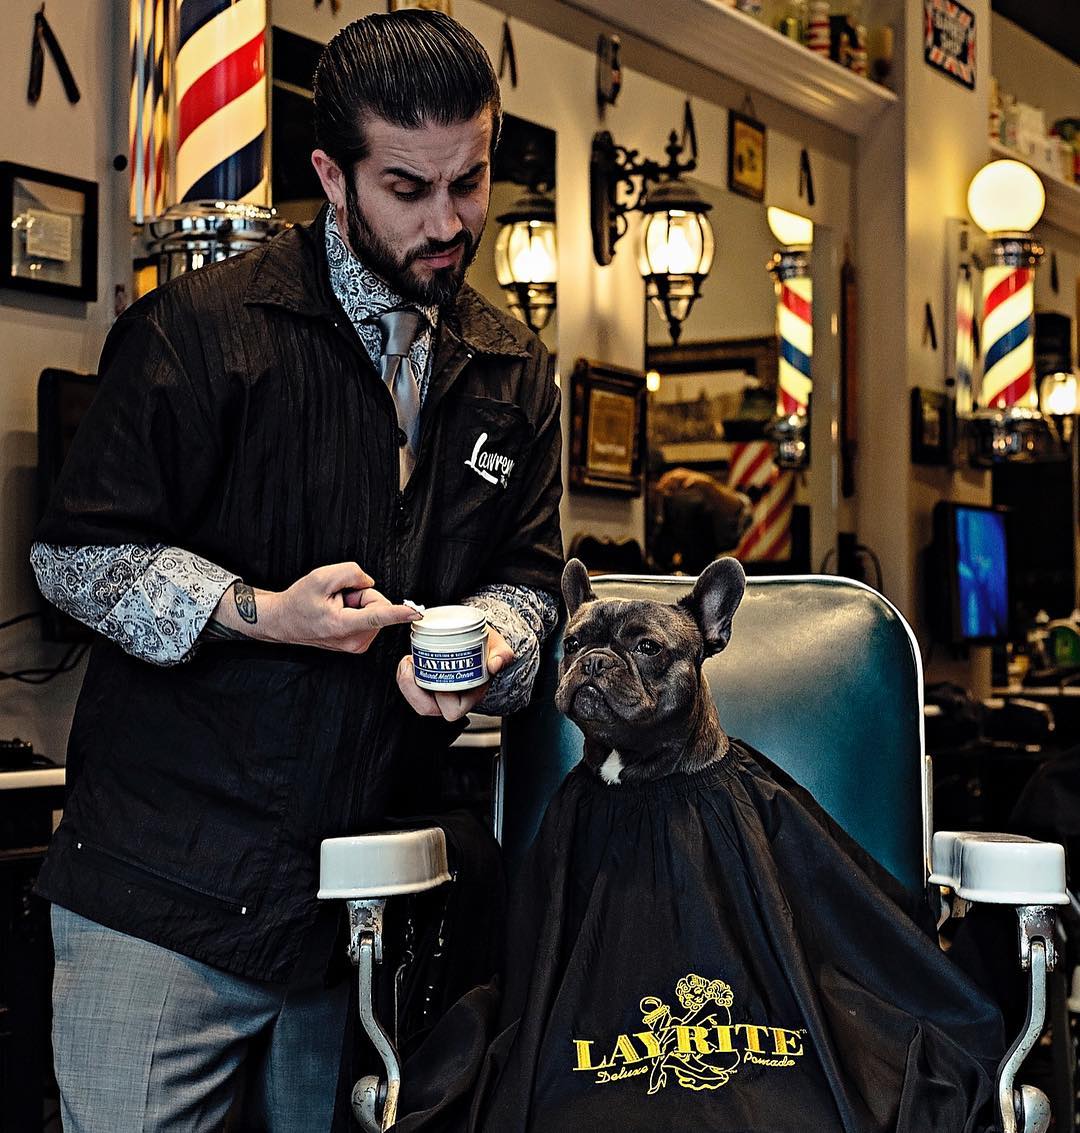 <a href="http://instagram.com/lawrencethebarber">@lawrencethebarber</a>” data-image-resolution=”1500w” data-src=”http://static1.squarespace.com/static/55720251e4b0573e634260aa/5771488629687fa3b1ba359c/577148866a49636abd192c78/1467042539721/%40lawrencethebarber.jpg” data-image=”http://static1.squarespace.com/static/55720251e4b0573e634260aa/5771488629687fa3b1ba359c/577148866a49636abd192c78/1467042539721/%40lawrencethebarber.jpg” data-image-dimensions=”1080×1133″ data-image-focal-point=”0.5,0.5″ data-load=”false” data-image-id=”577148866a49636abd192c78″ data-type=”image”></div>
<div id=